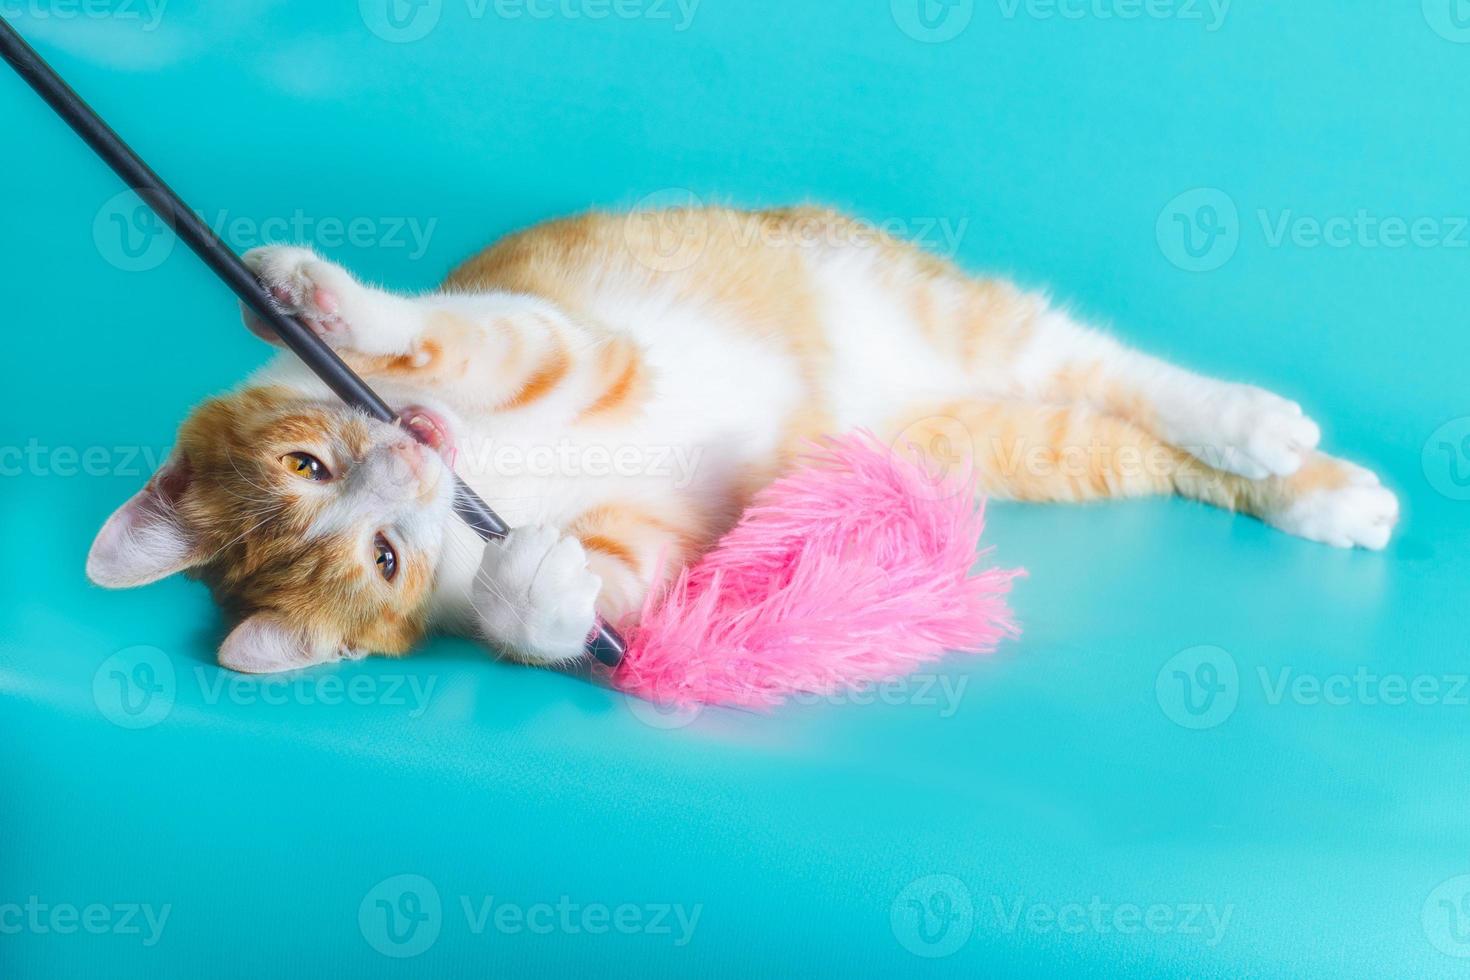 Kitten playing with feather want photo